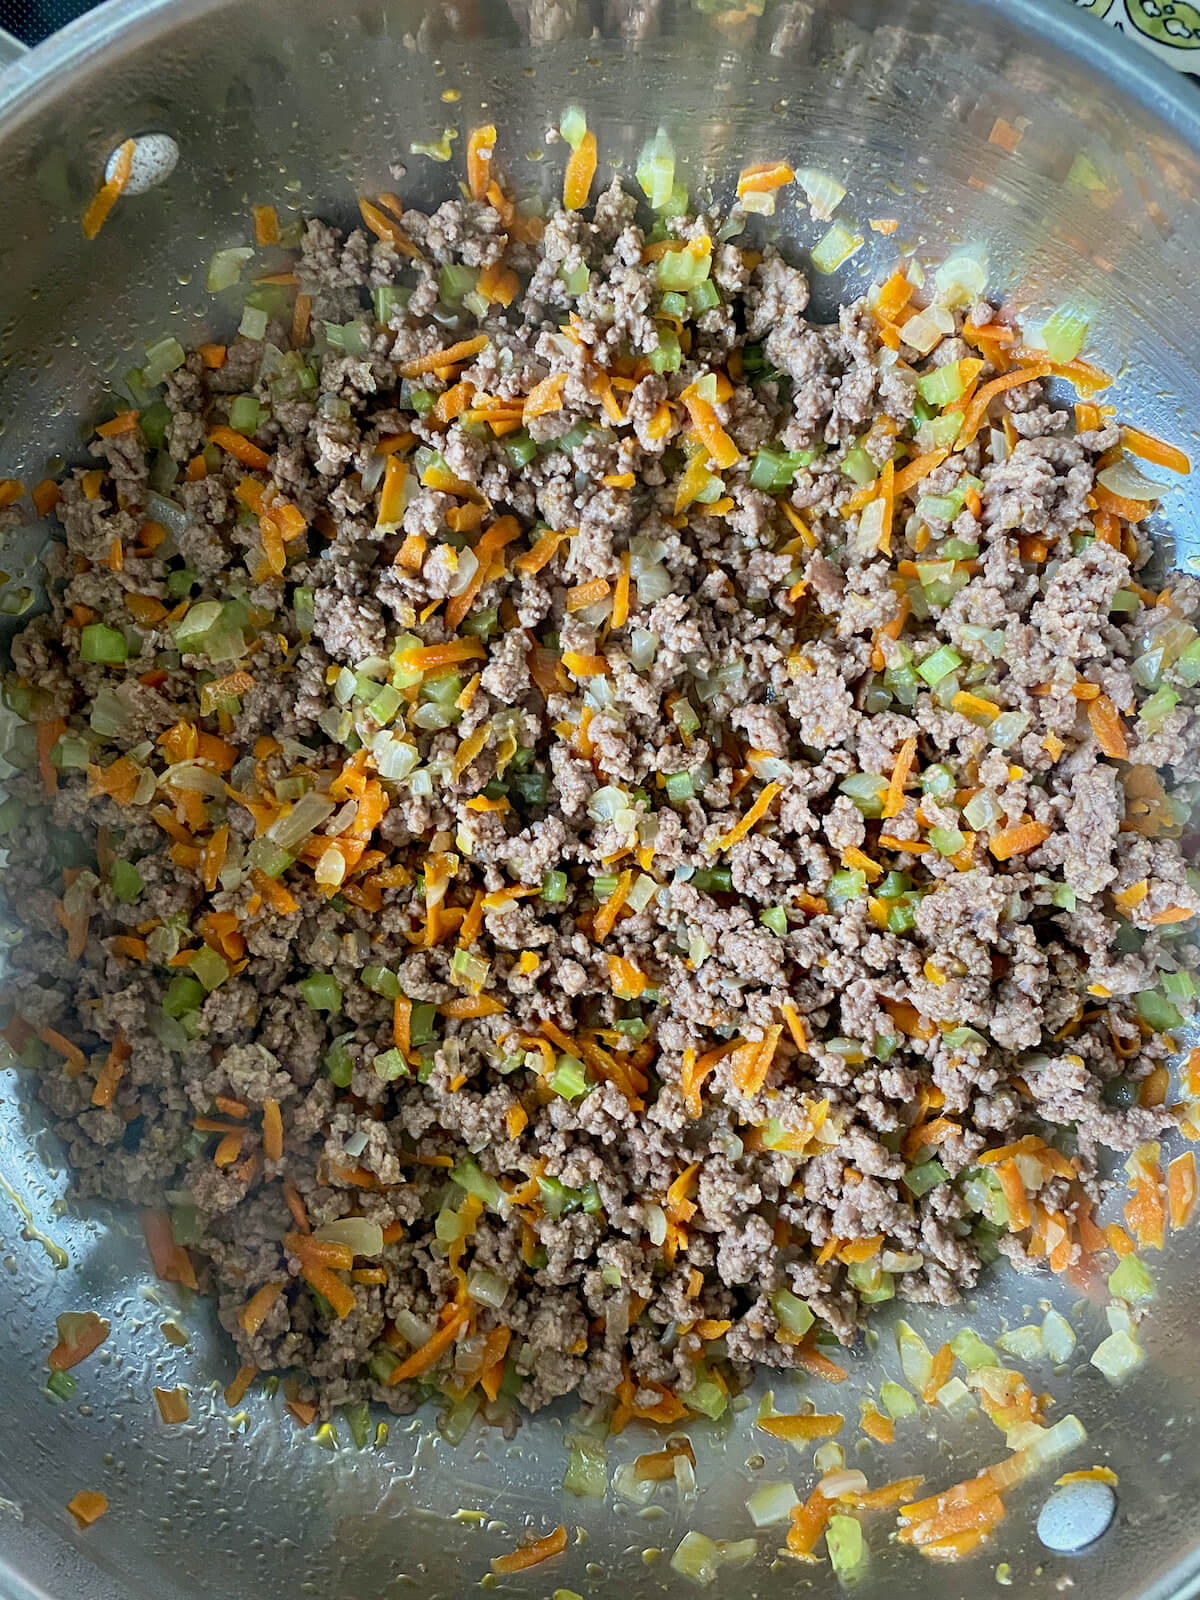 Cooked ground beef, onions, celery, and carrots in a stainless steel pot.